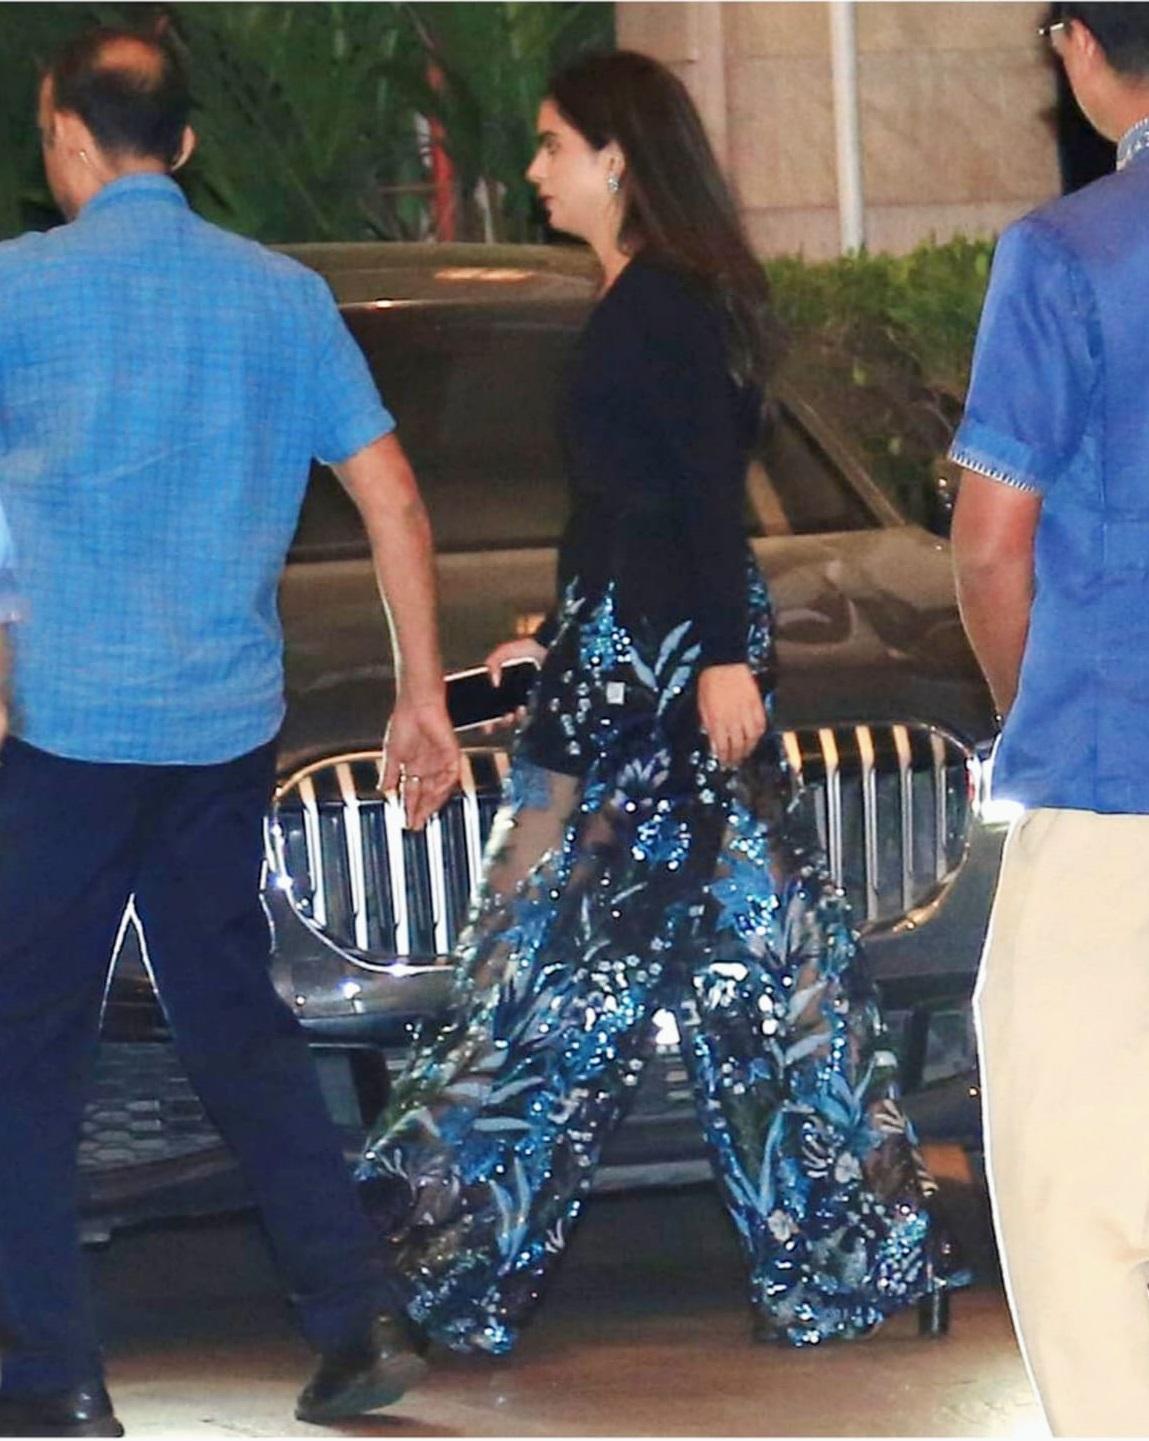 After enjoying a delicious dinner, they were seen leaving the hotel together